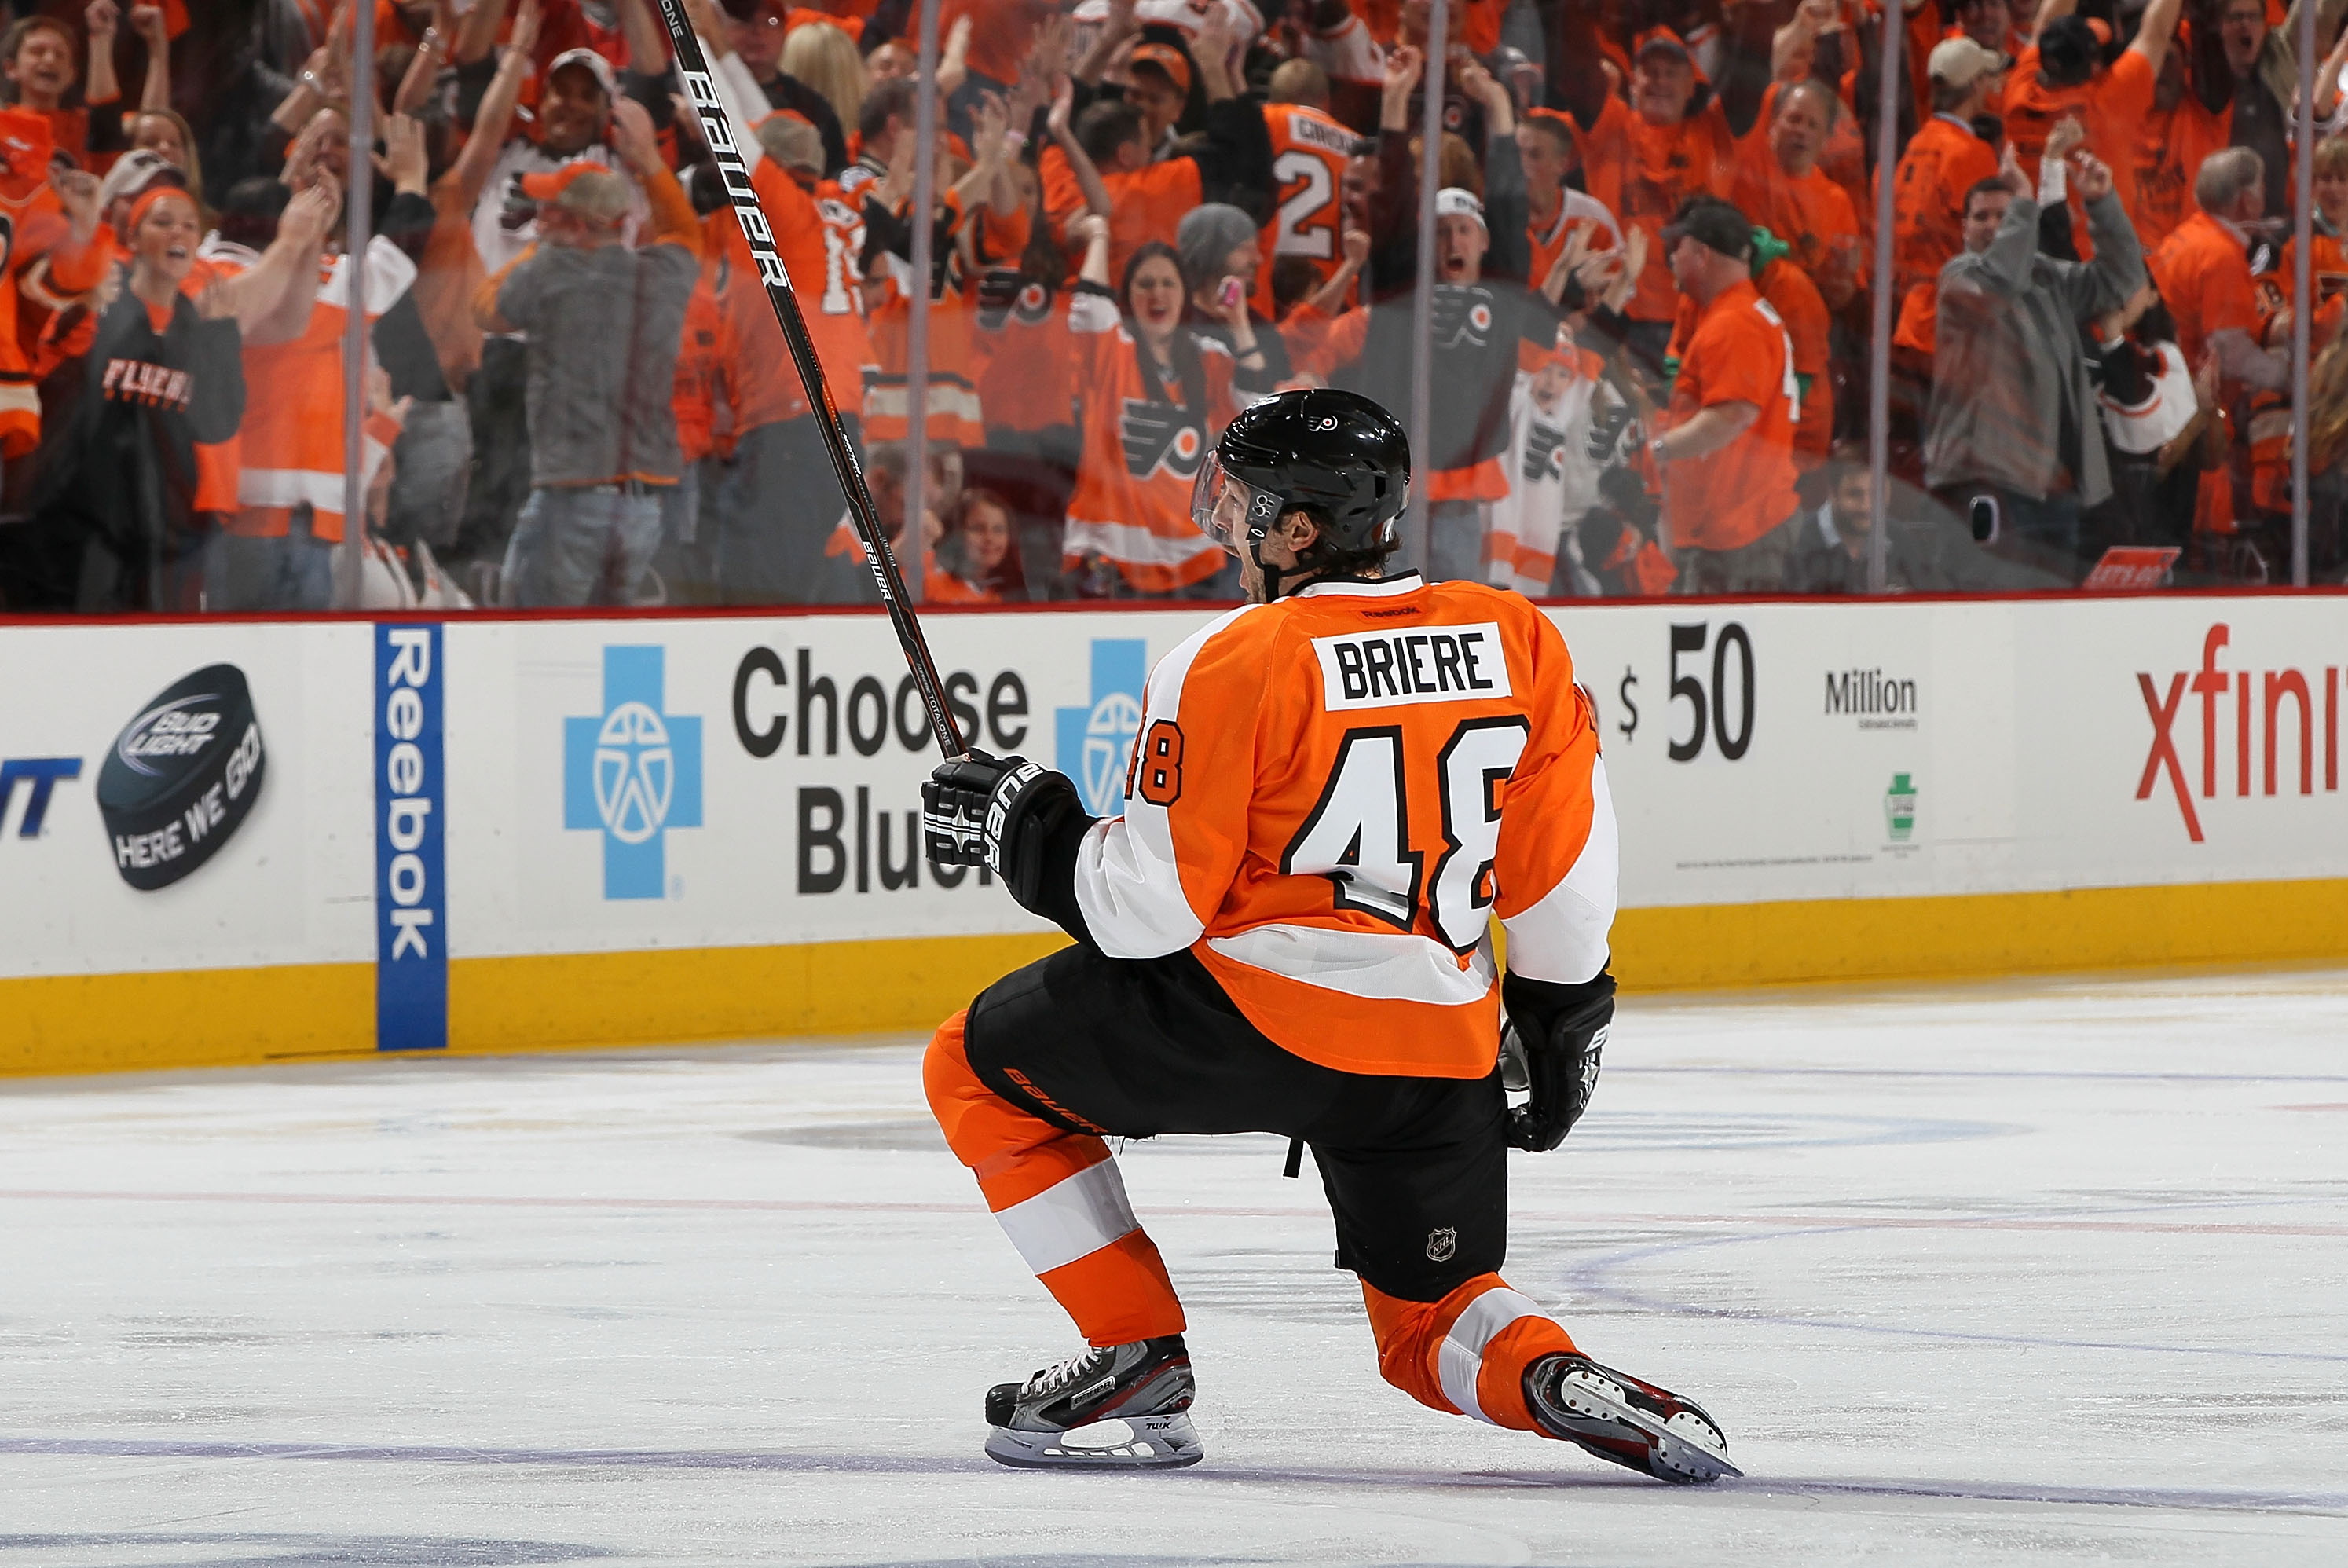 Flyers GM Danny Briere was an NHL All-Star and attended Penn's